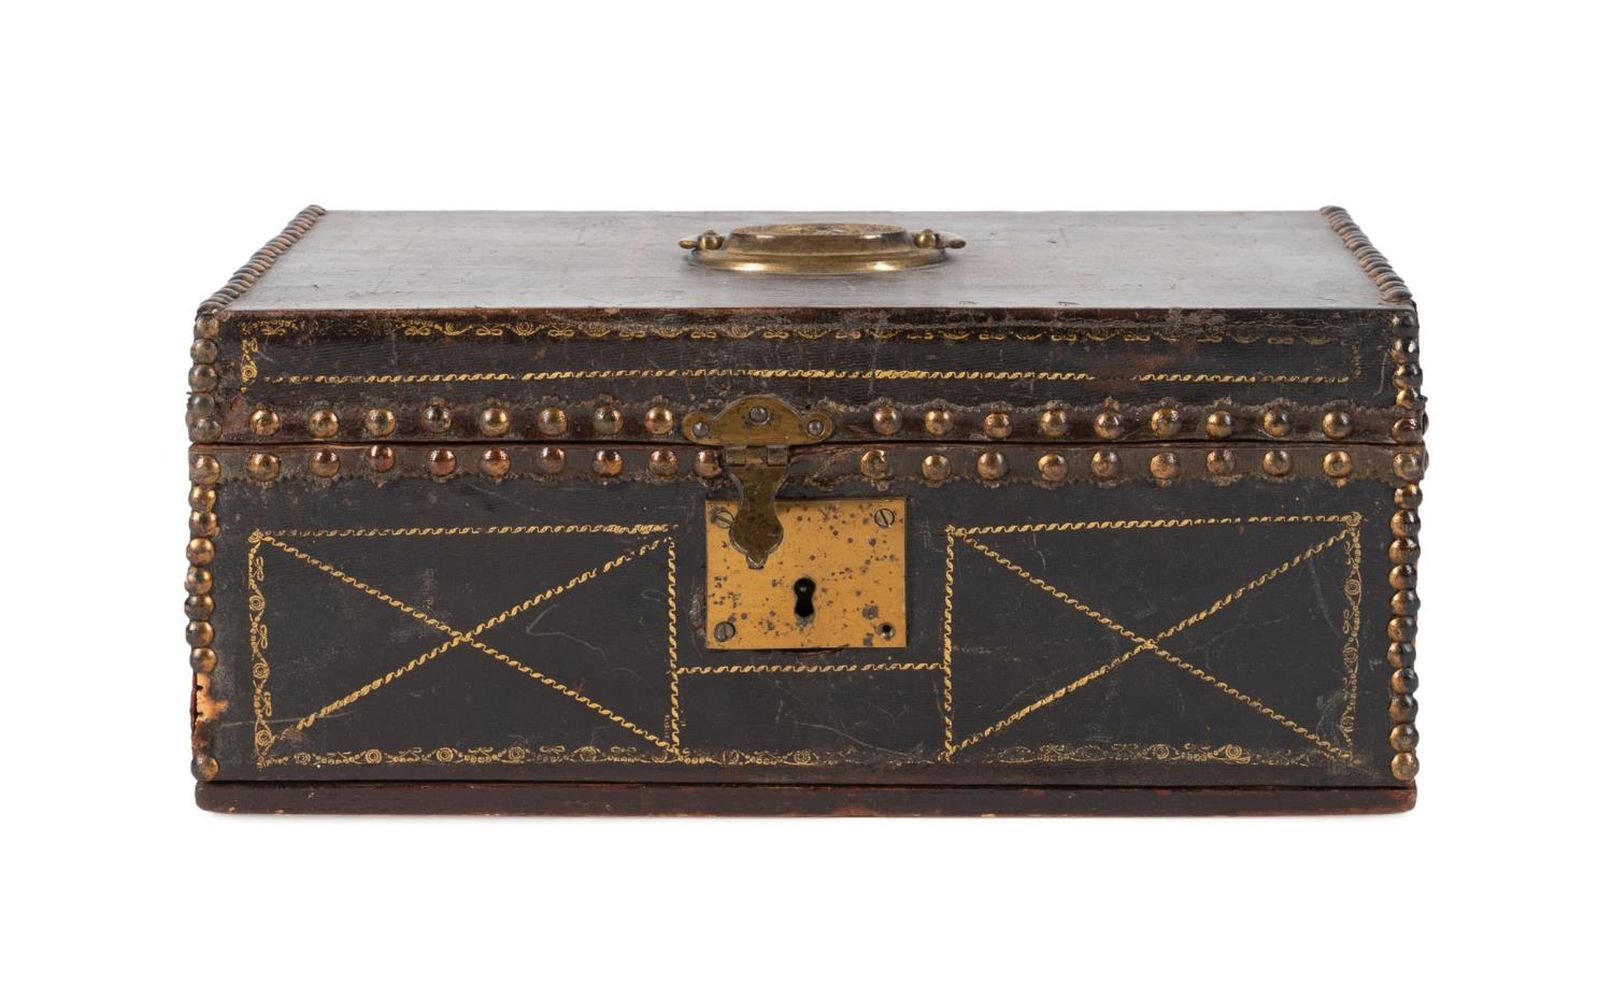 19TH C. AMERICAN LEATHER COVERED